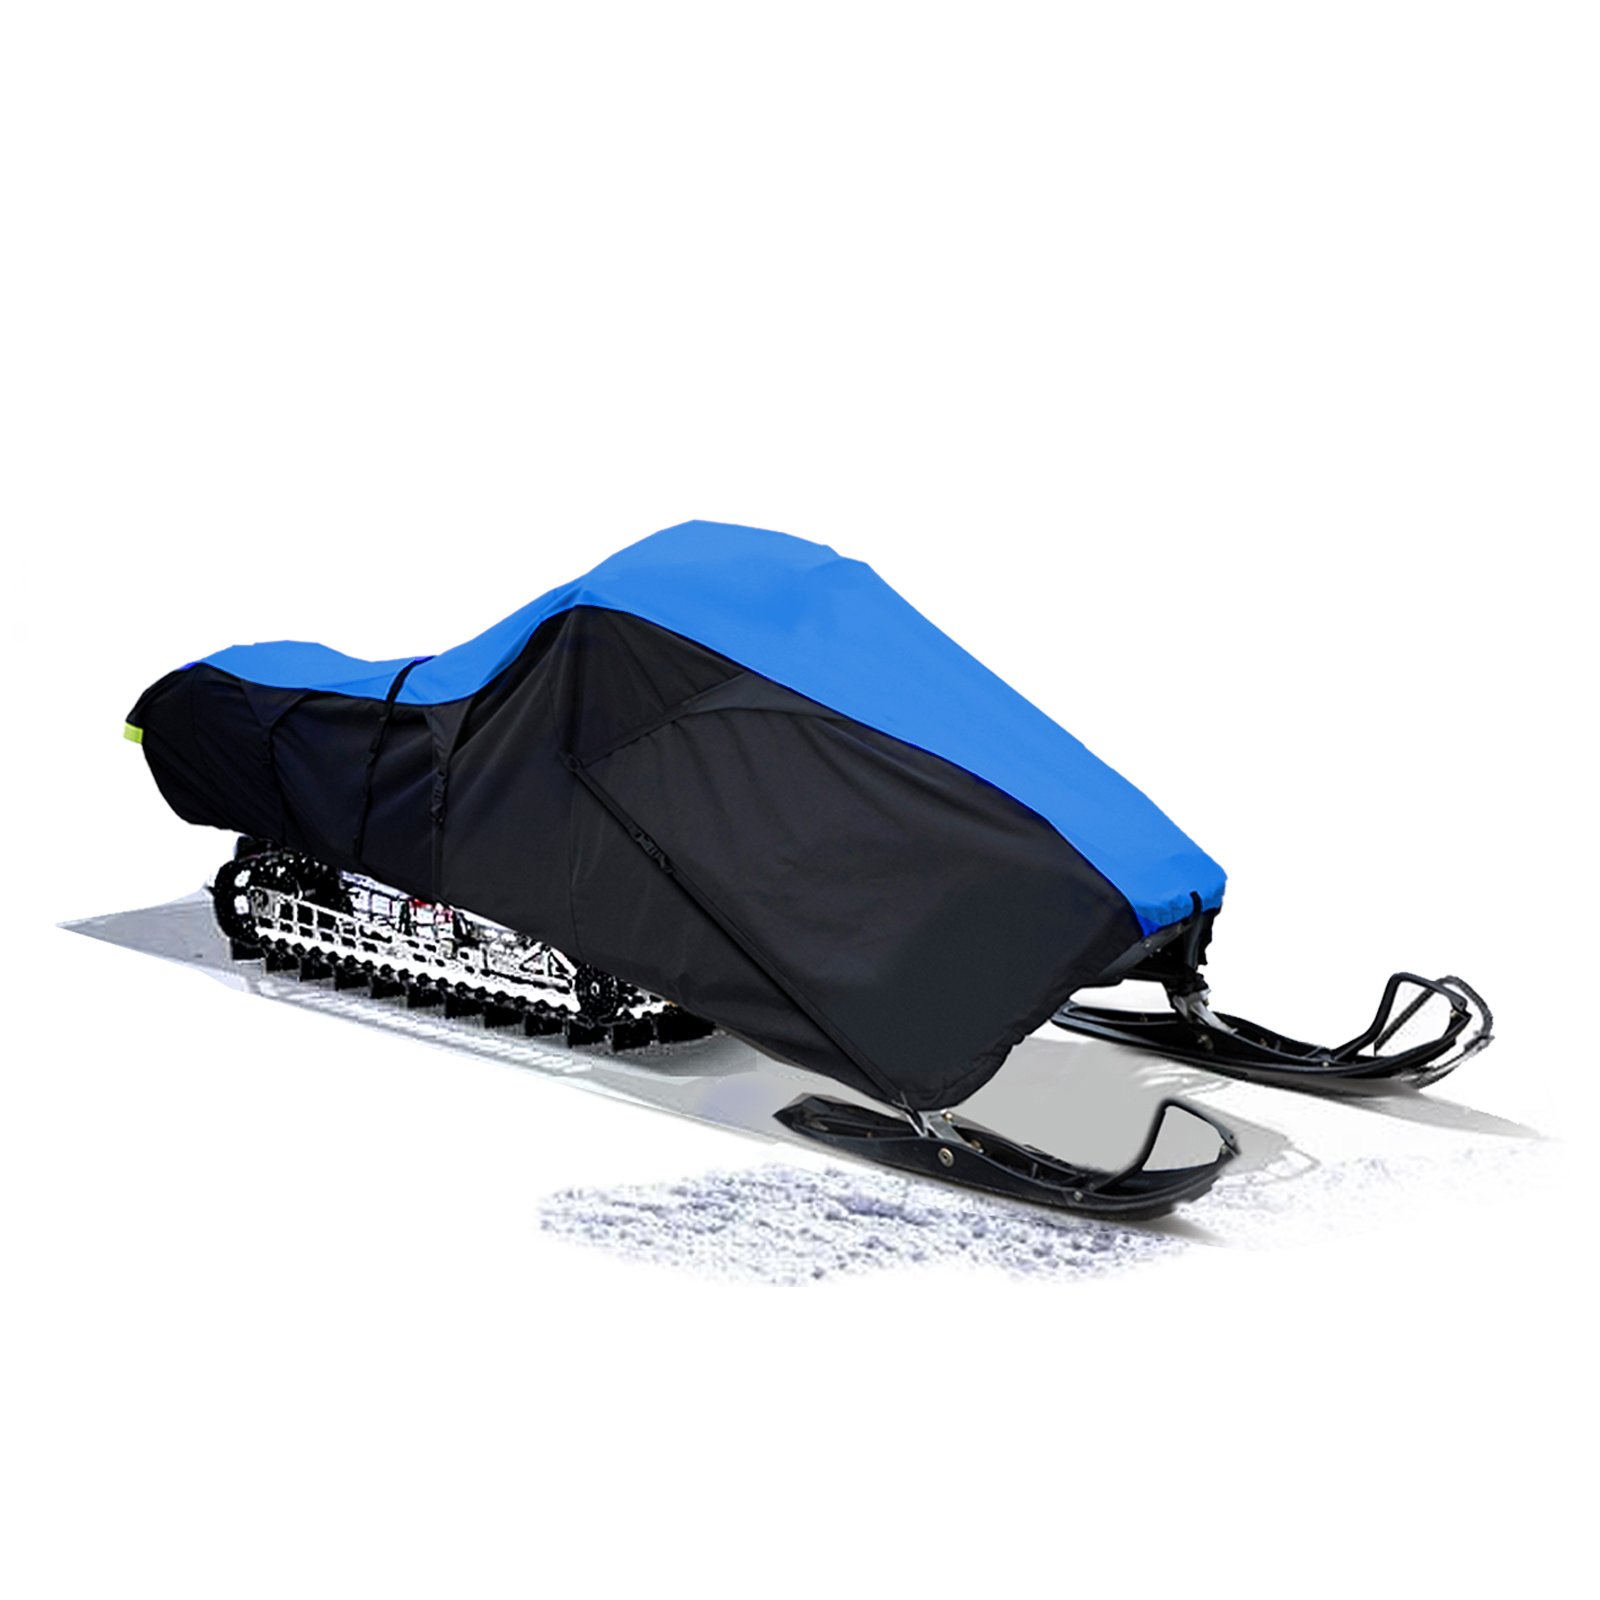 EliteShield Heavy Duty Trailerable Snowmobile Storage Cover Fits Youth Snowmobile up to 80" Blue/Black - image 1 of 7